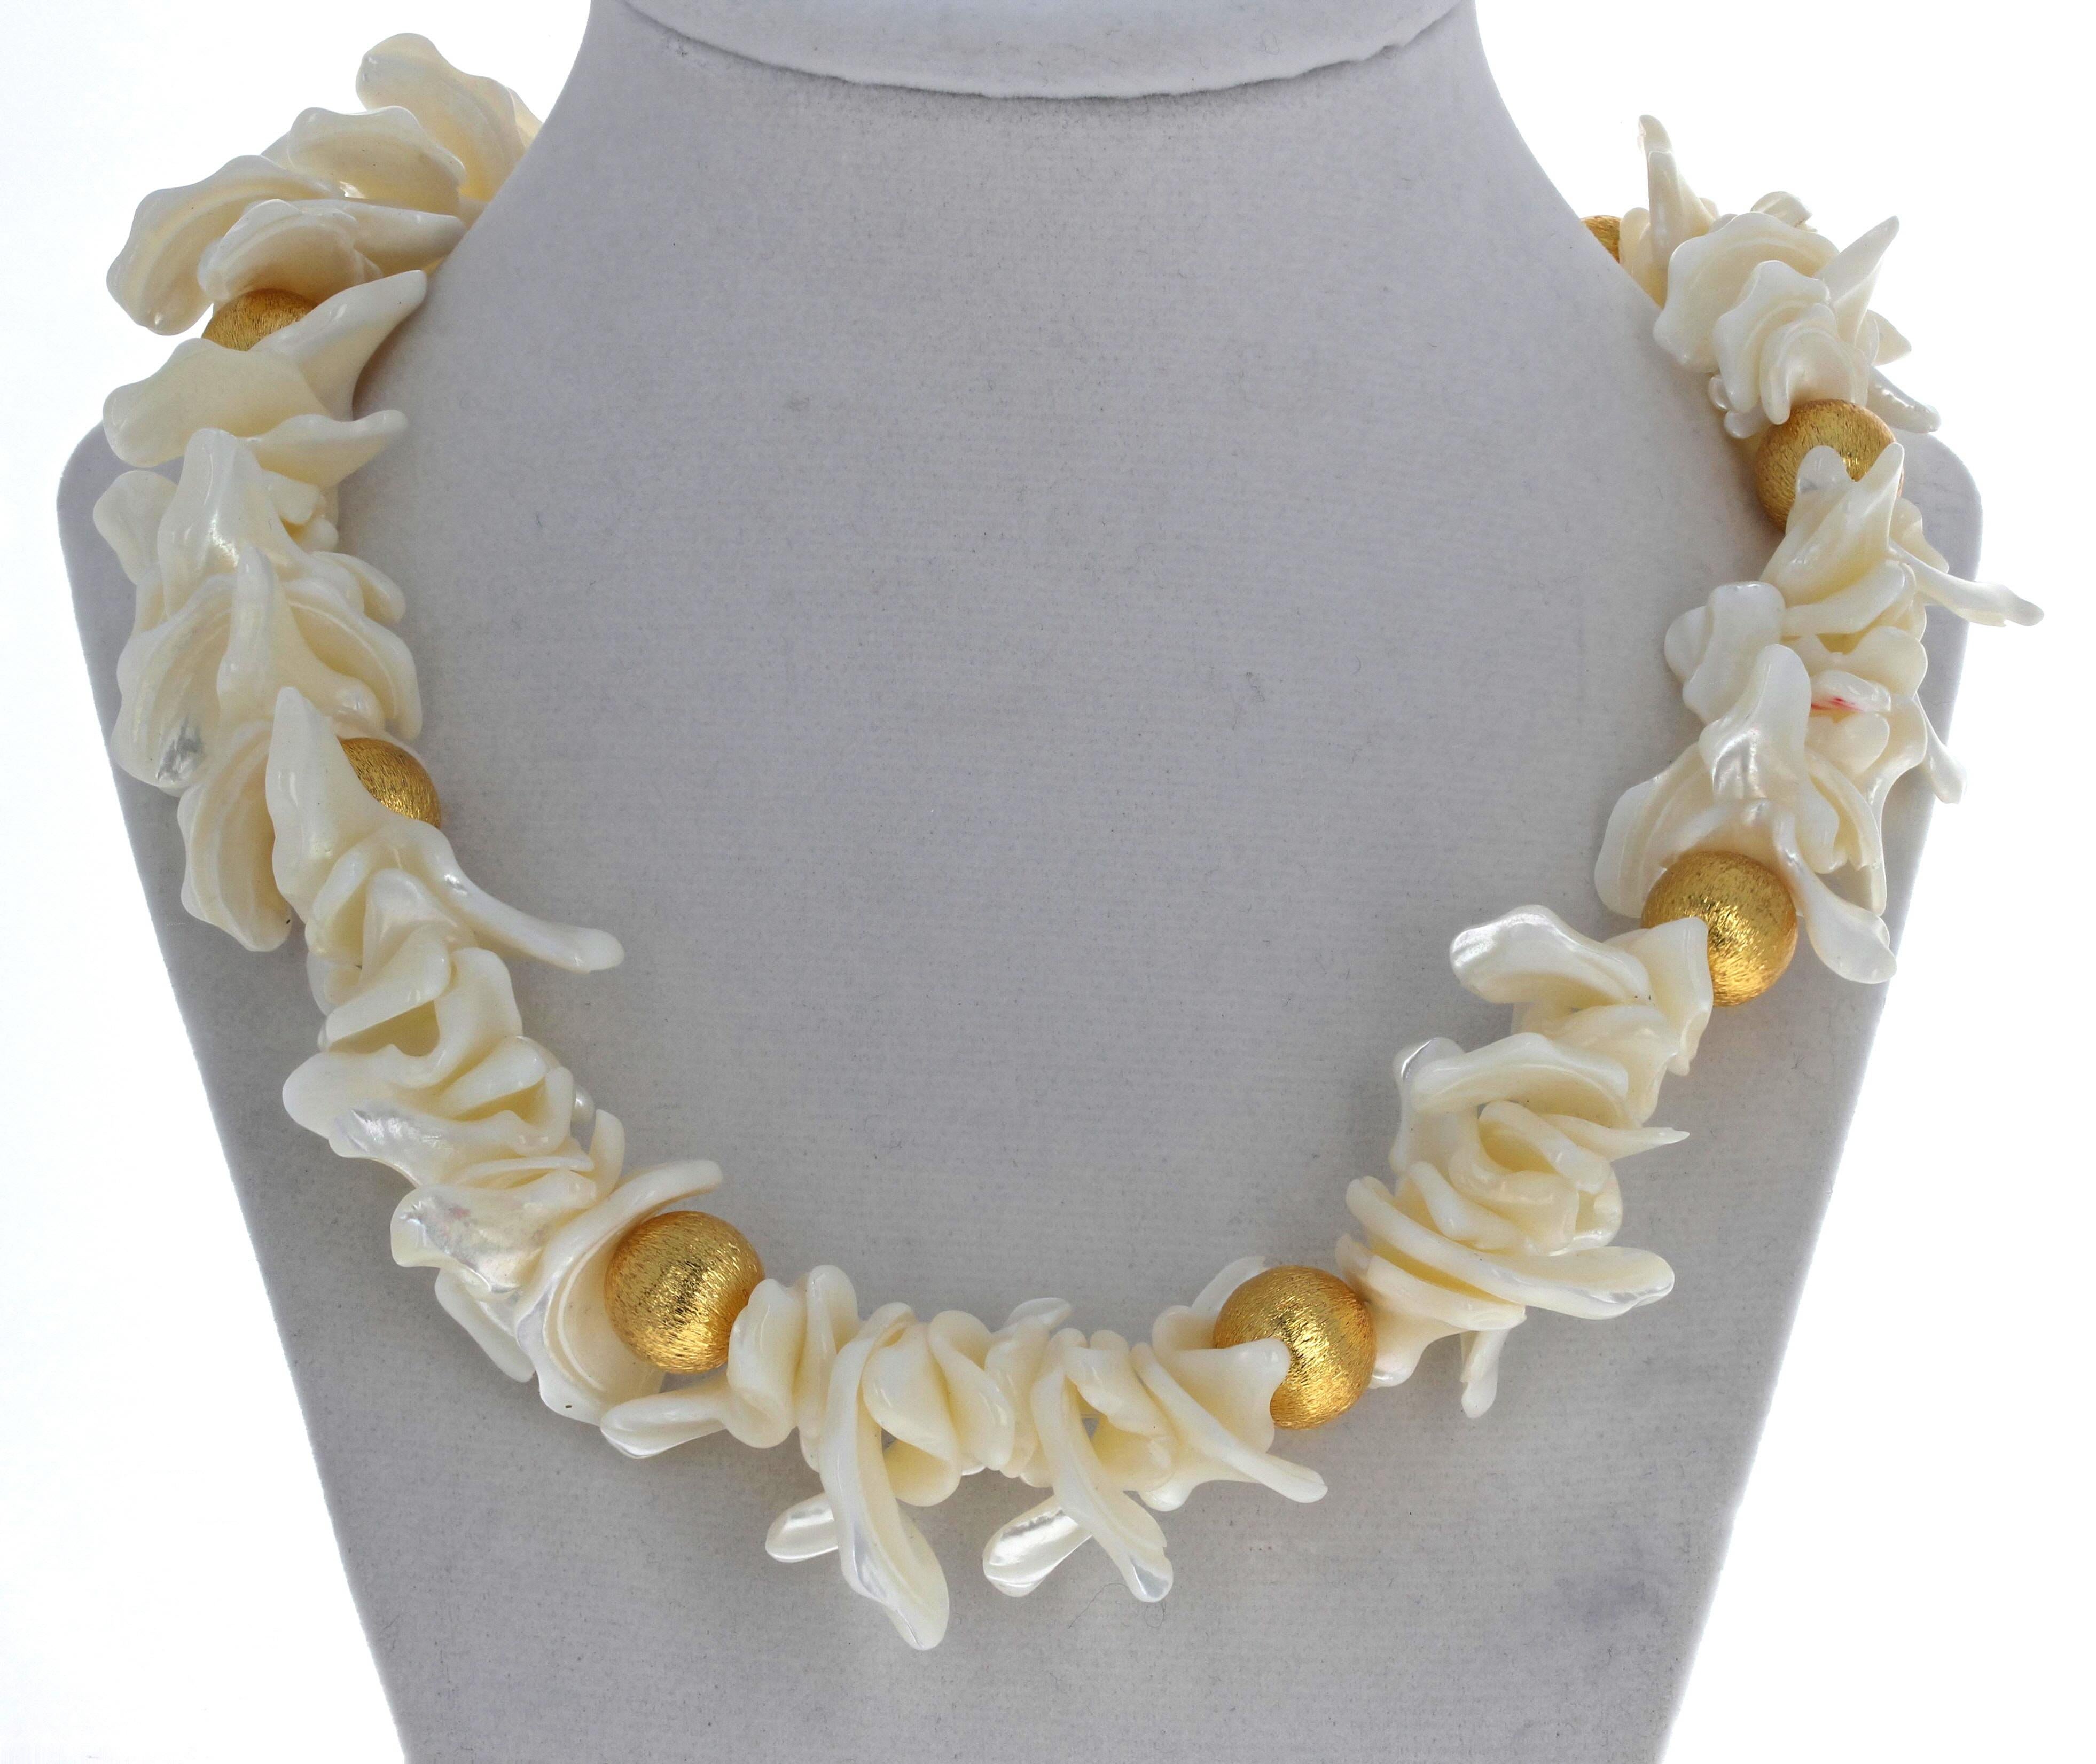 This magnificent 19 inch long natural white flip flop Pearls necklace is enhanced with yellow gold plated rondels.  The longest Pearls are approximately 1 1/4 inches long.  The large gold plated rondels are 13mm.  The clasp is an easy to use gold